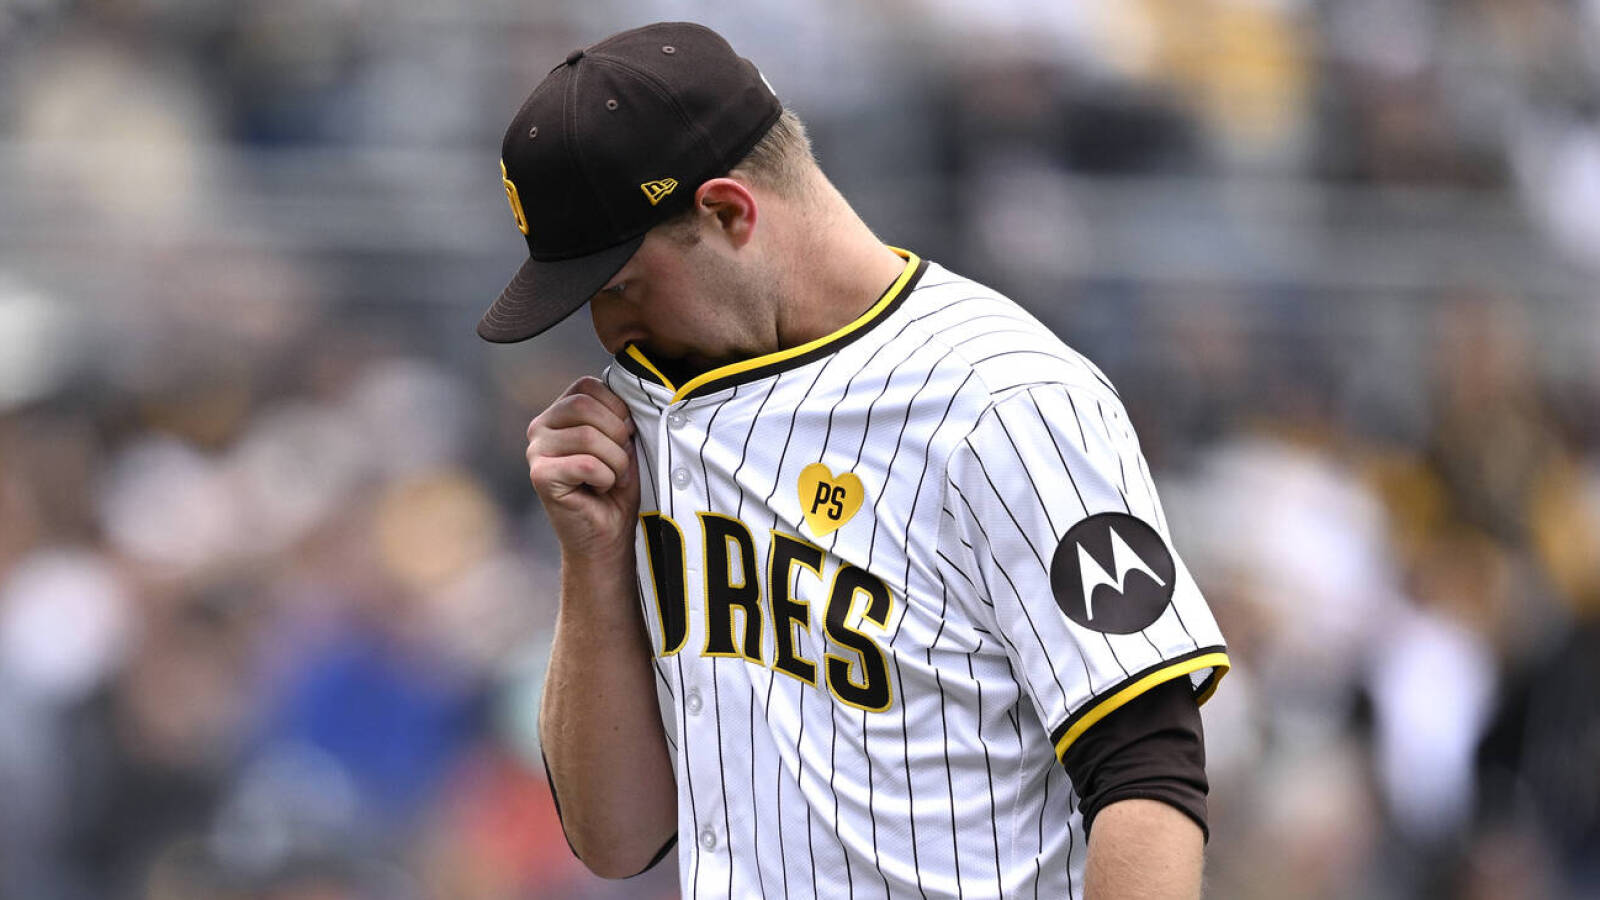 Padres pitcher has honest reaction to team getting booed off the field